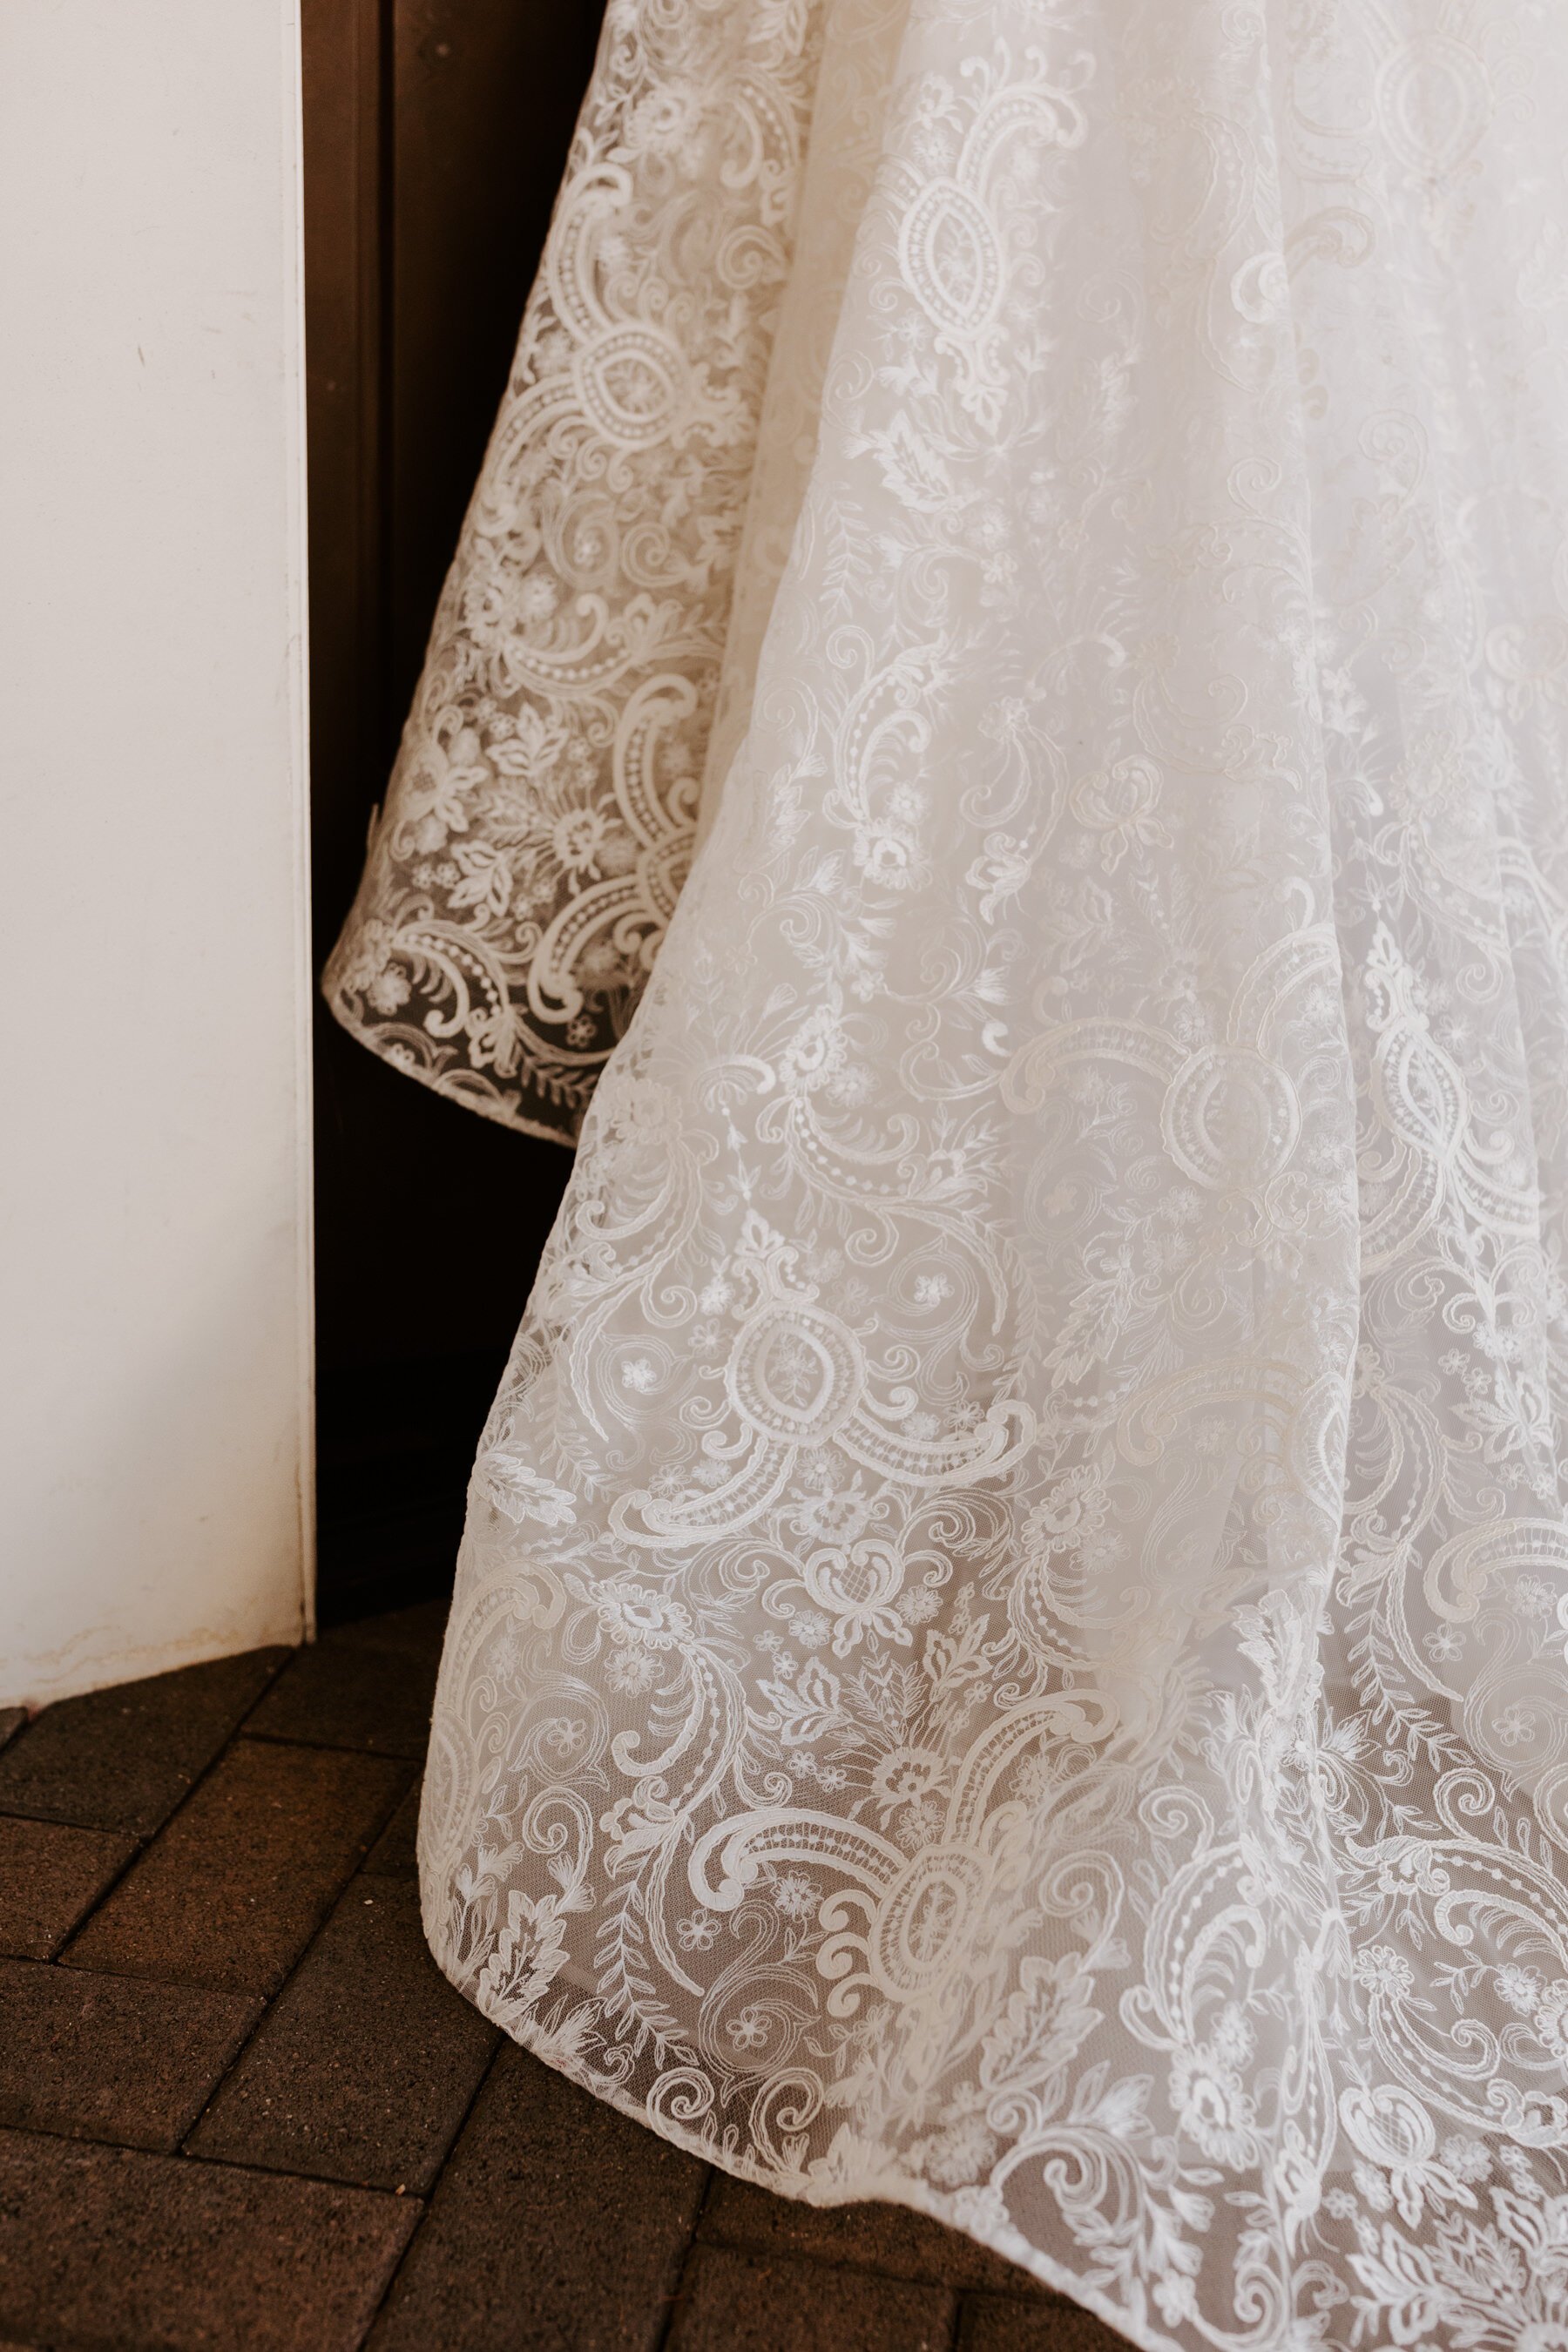 Close up of wedding dress lace detail, La Serena Villas Palm Springs, Palm Springs Wedding Photographer, Photo by Tida Svy